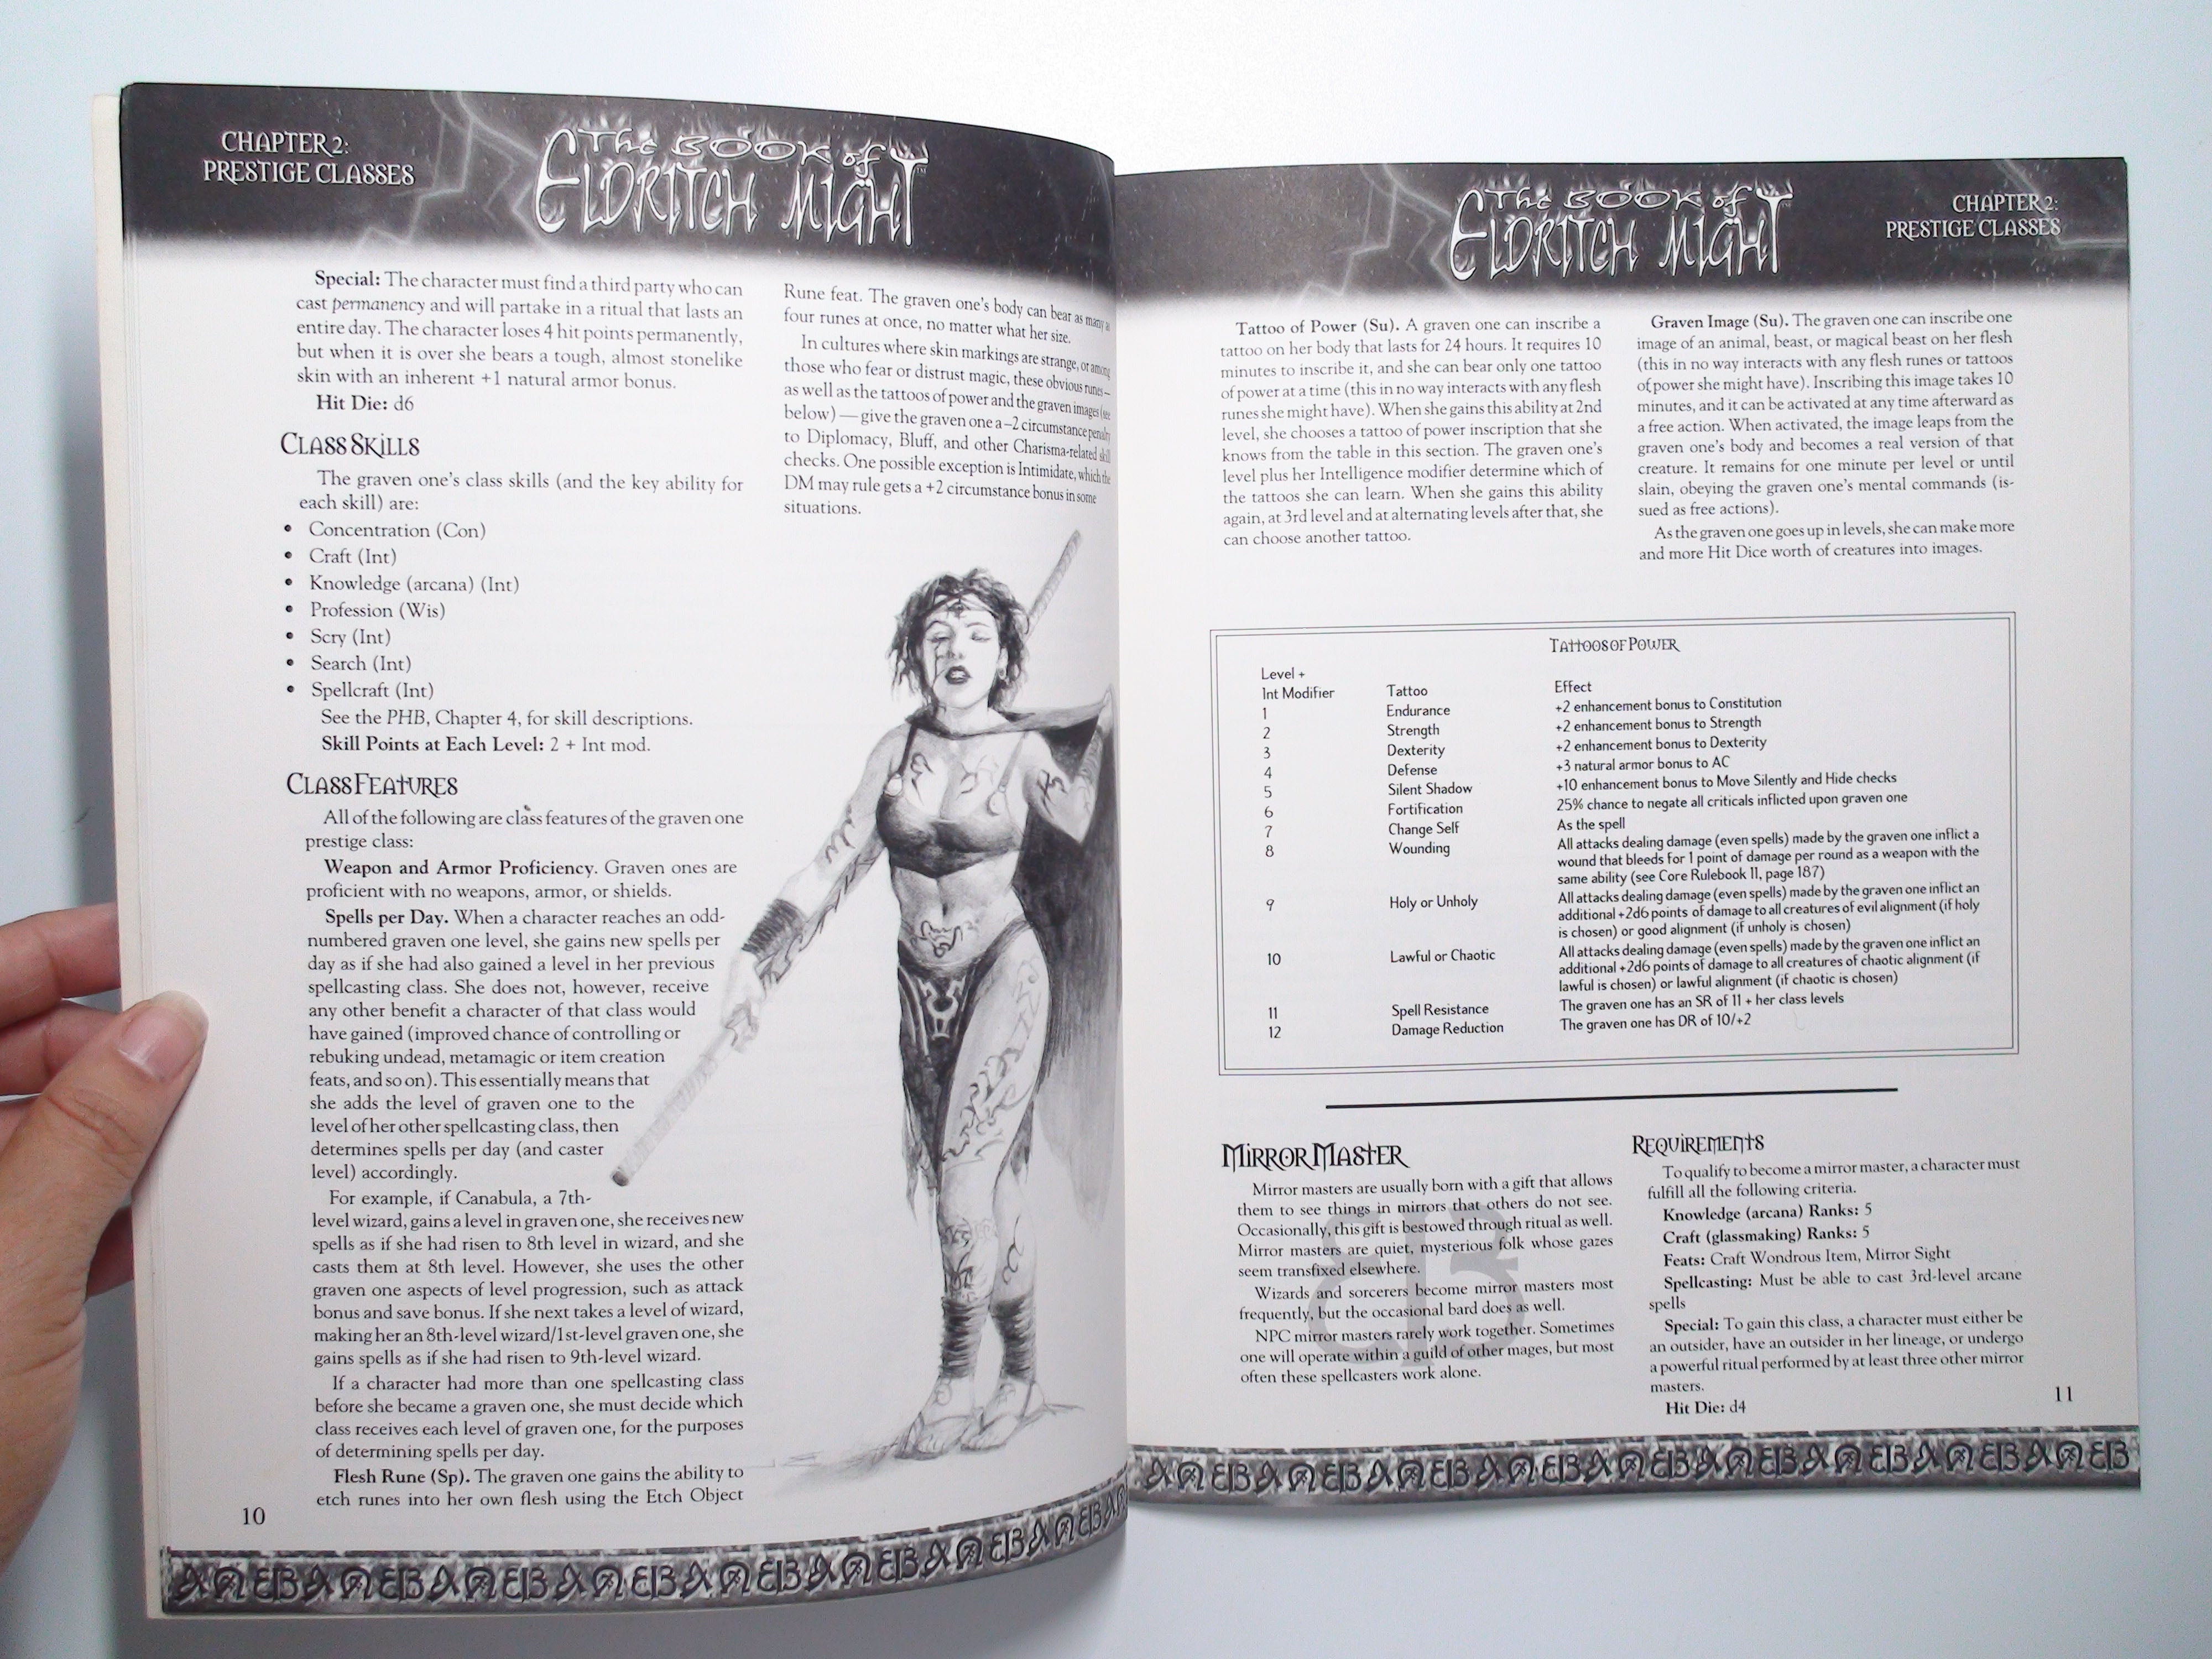 The Book of Eldritch Might, Sword and Sorcery Games, D20 RPG, 2001